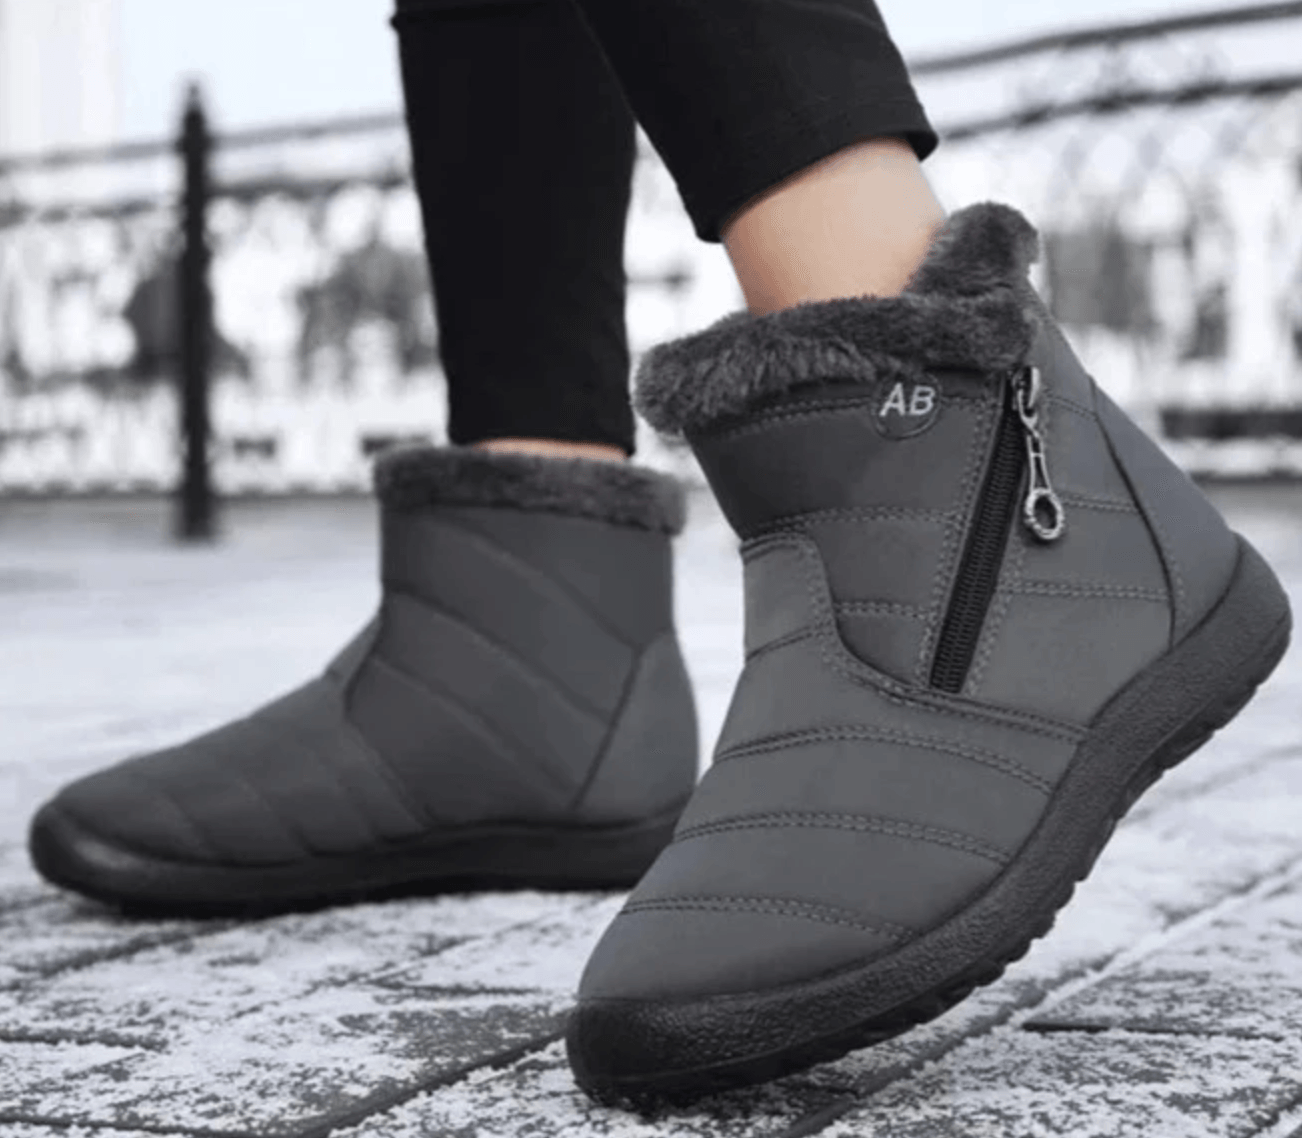 Waterproof Snow Boots for Women - Kudos Gadgets